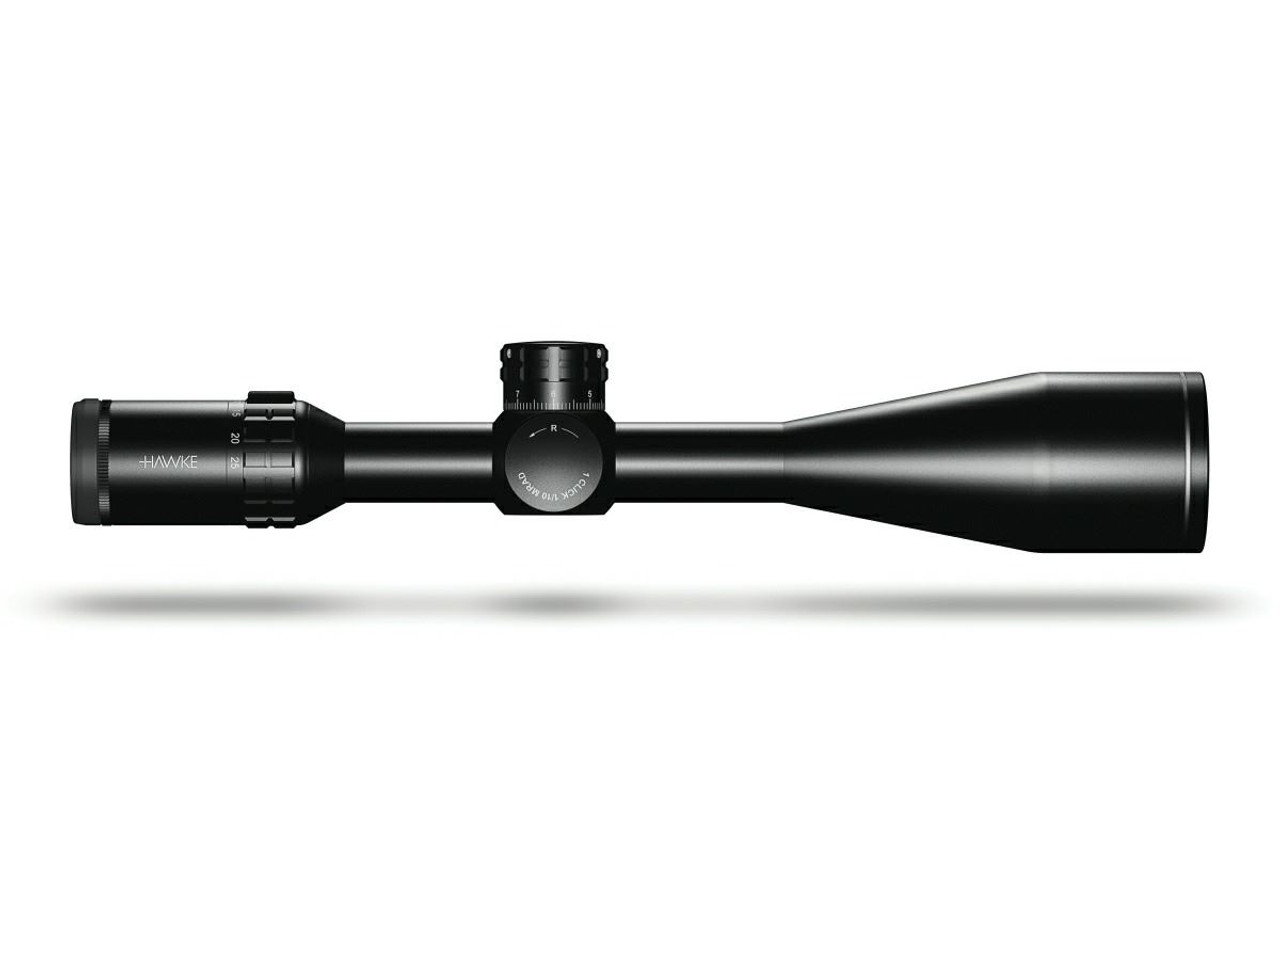 Hawke Frontier SF 5-25x50 Rifle Scope MilPro